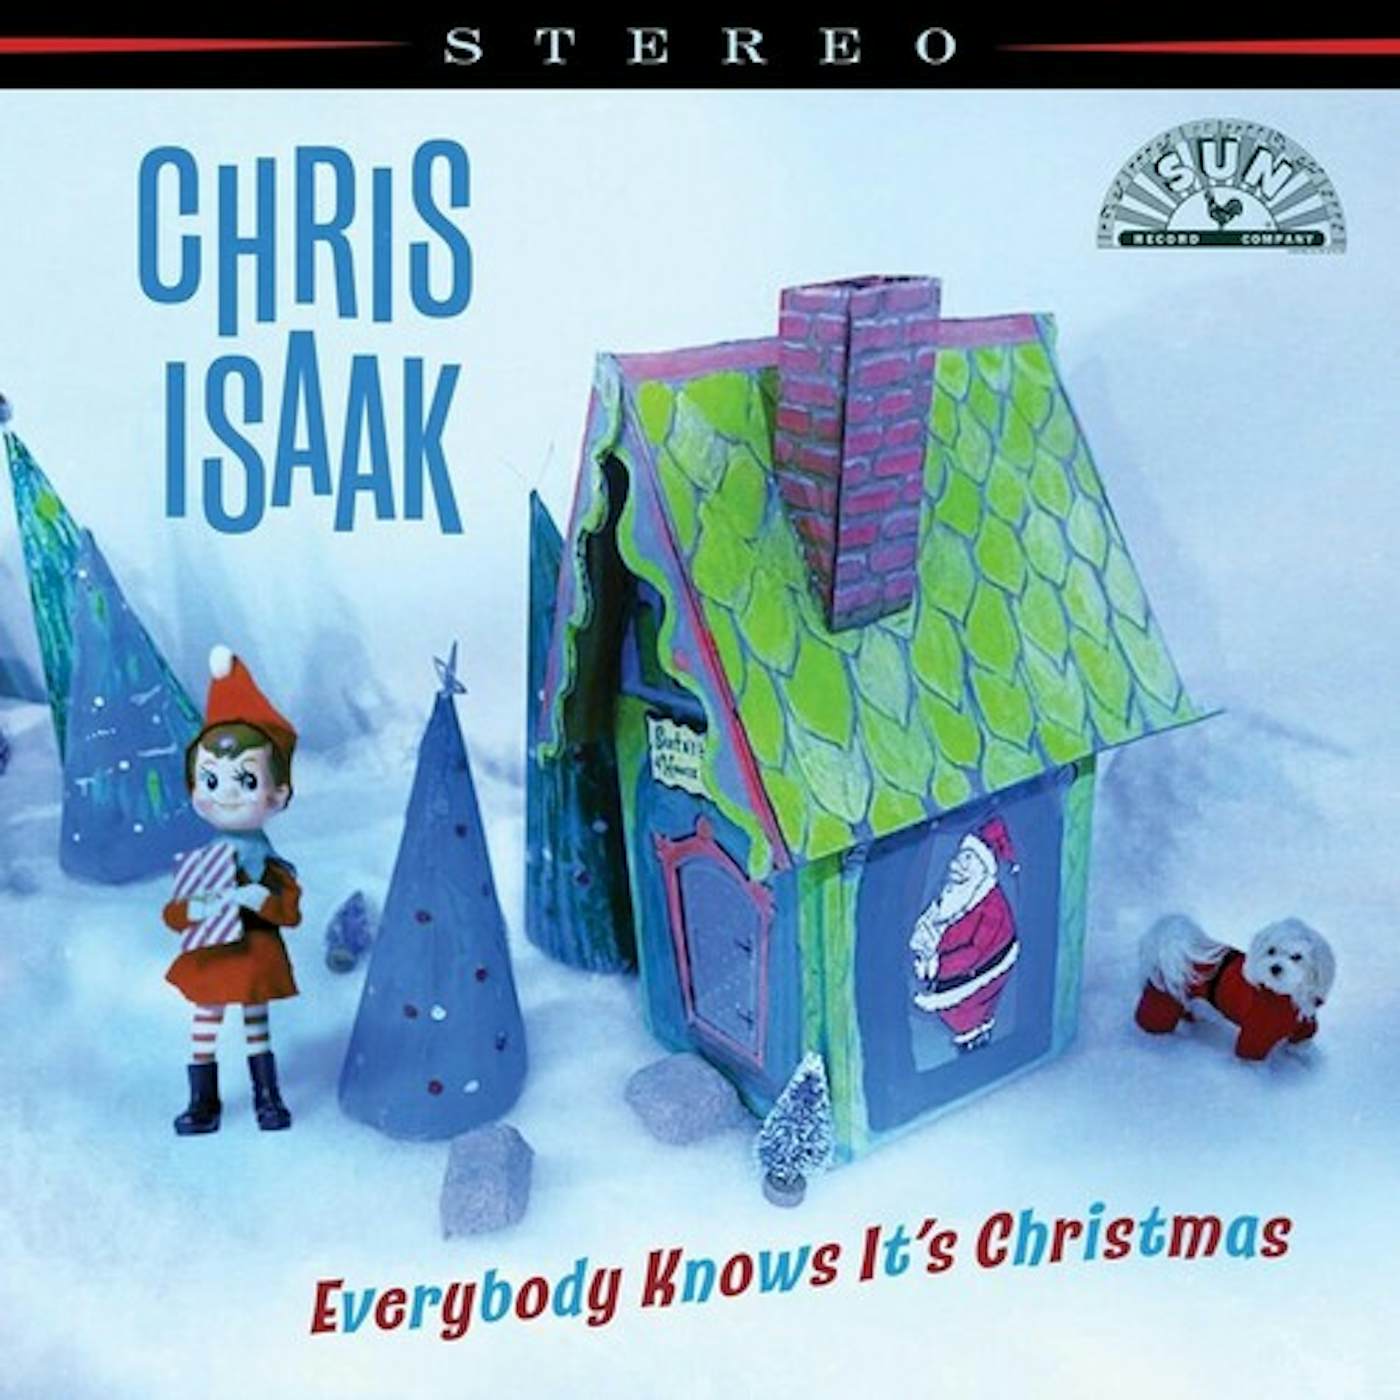 Chris Isaak Everybody Knows It's Christmas Vinyl Record